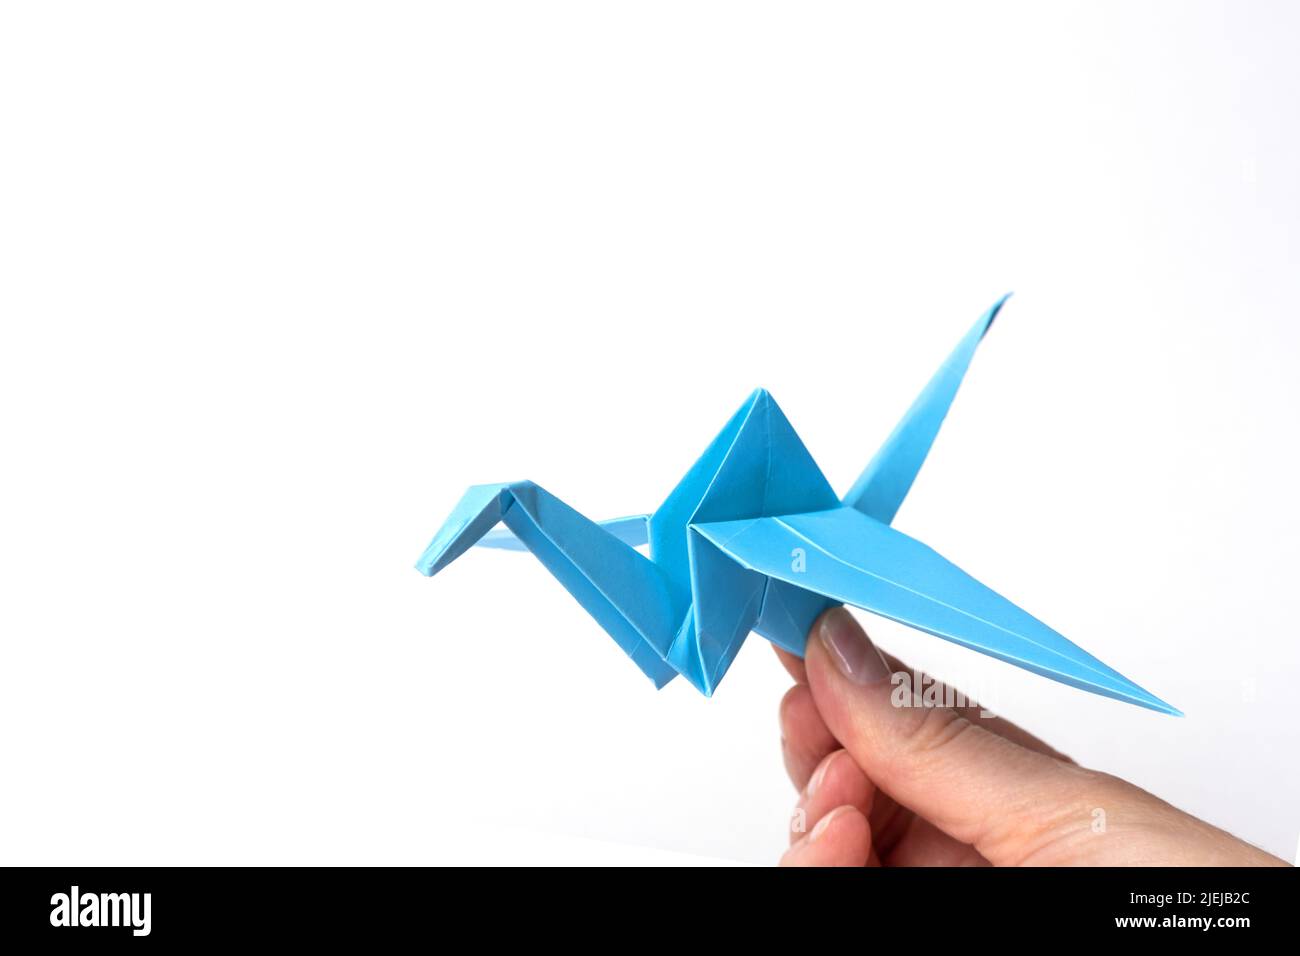 Hand holding paper blue bird isolated on white background. Paper crane as a symbol of peace. Paper origami. Paper crafts with children. Stock Photo